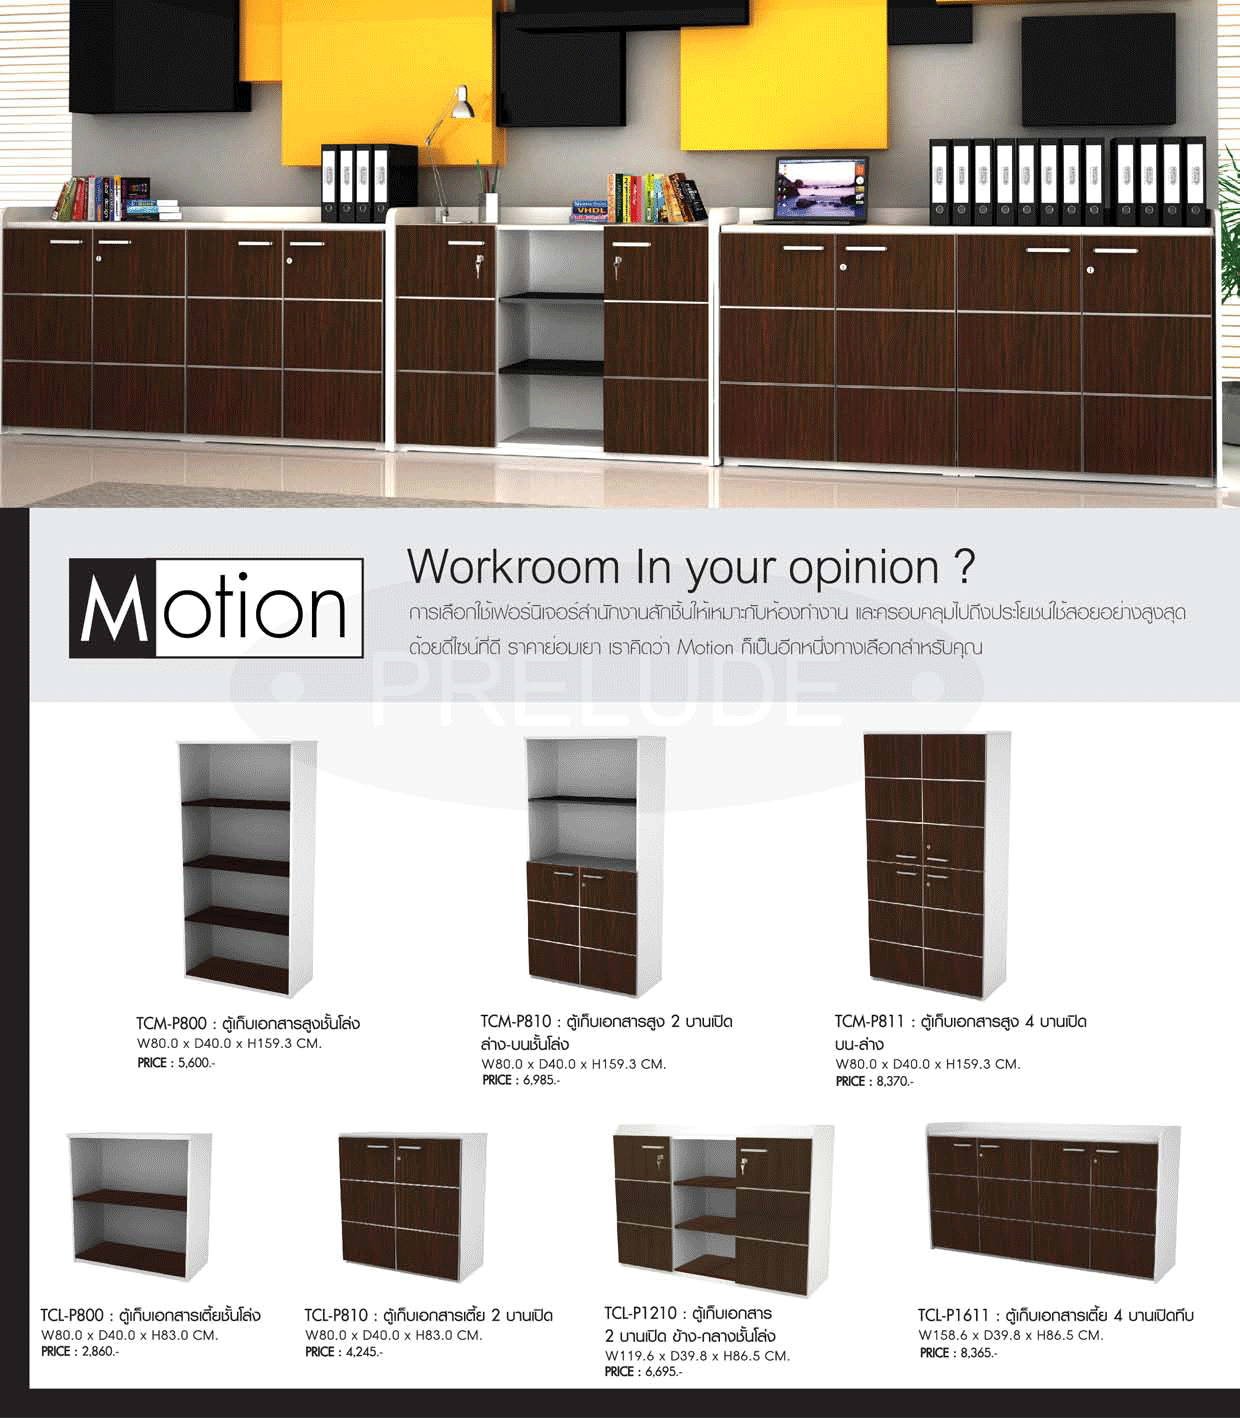 78017::TCL-P1210::A Prelude cabinet with double swing doors and middle open shelves. Dimension (WxDxH) cm : 120x40x89